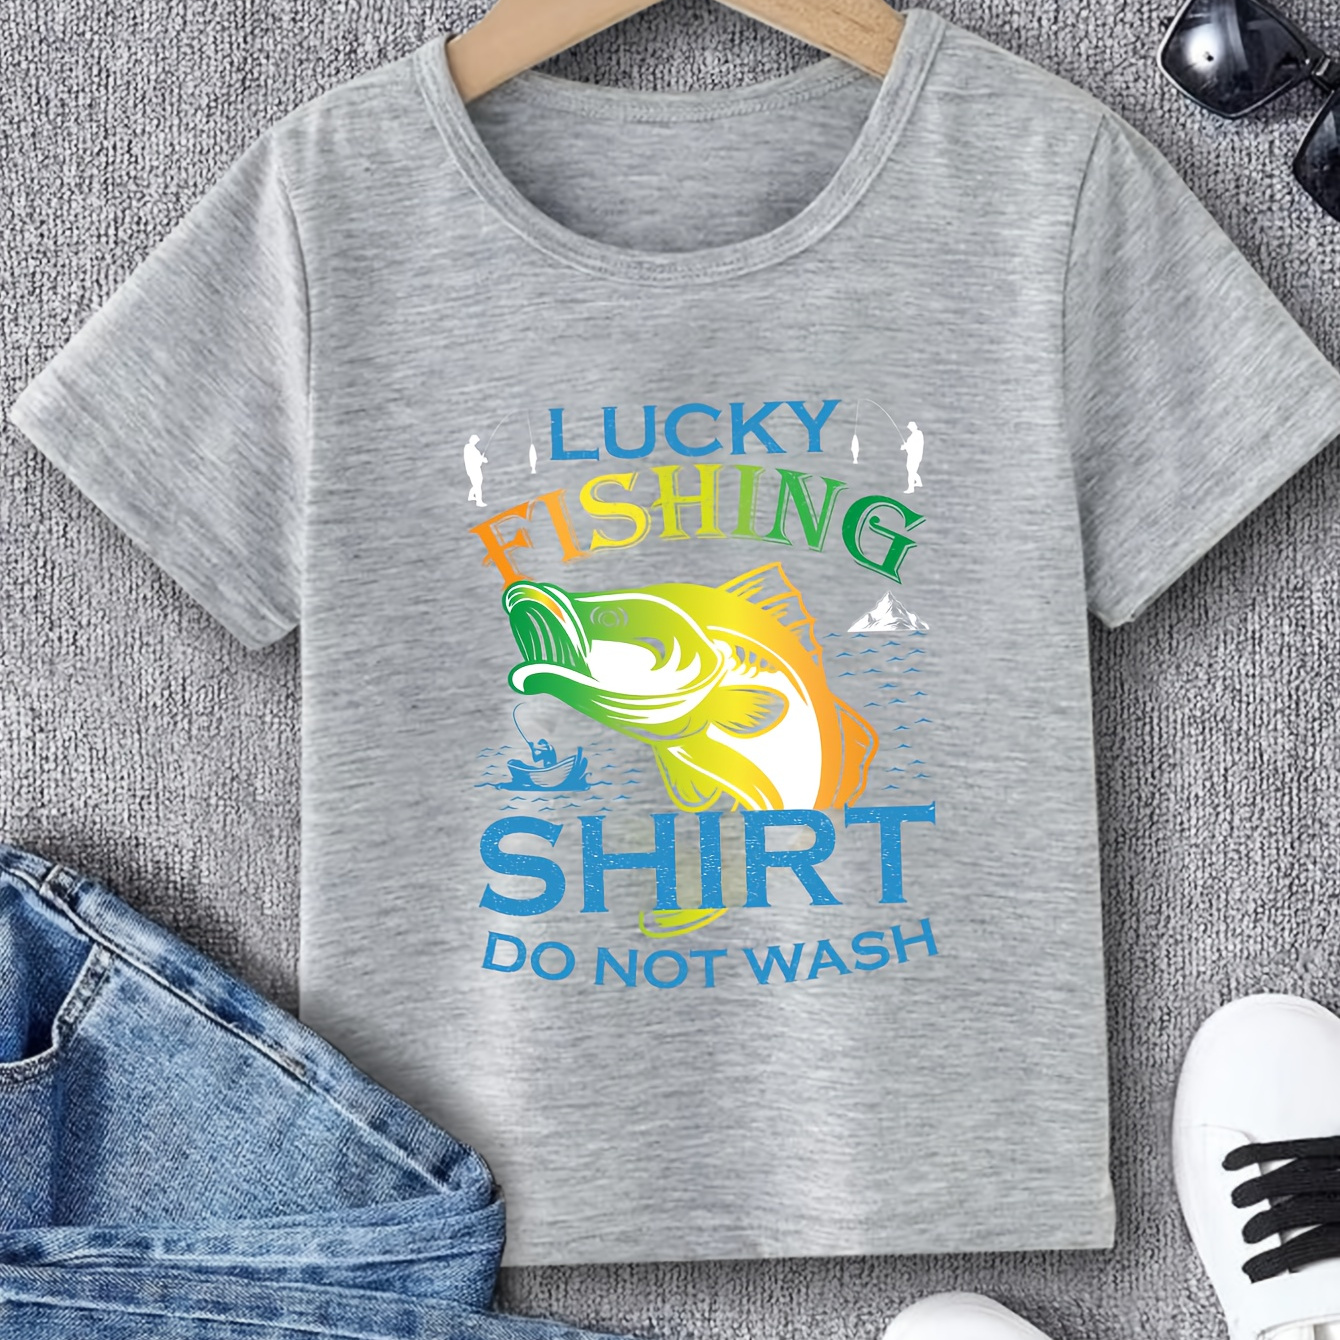 

Casual Energetic Boys' Summer Top - Lucky Fishing Print Short Sleeve Crew Neck T-shirt - Trendy Tee Tops Father's Day Gift